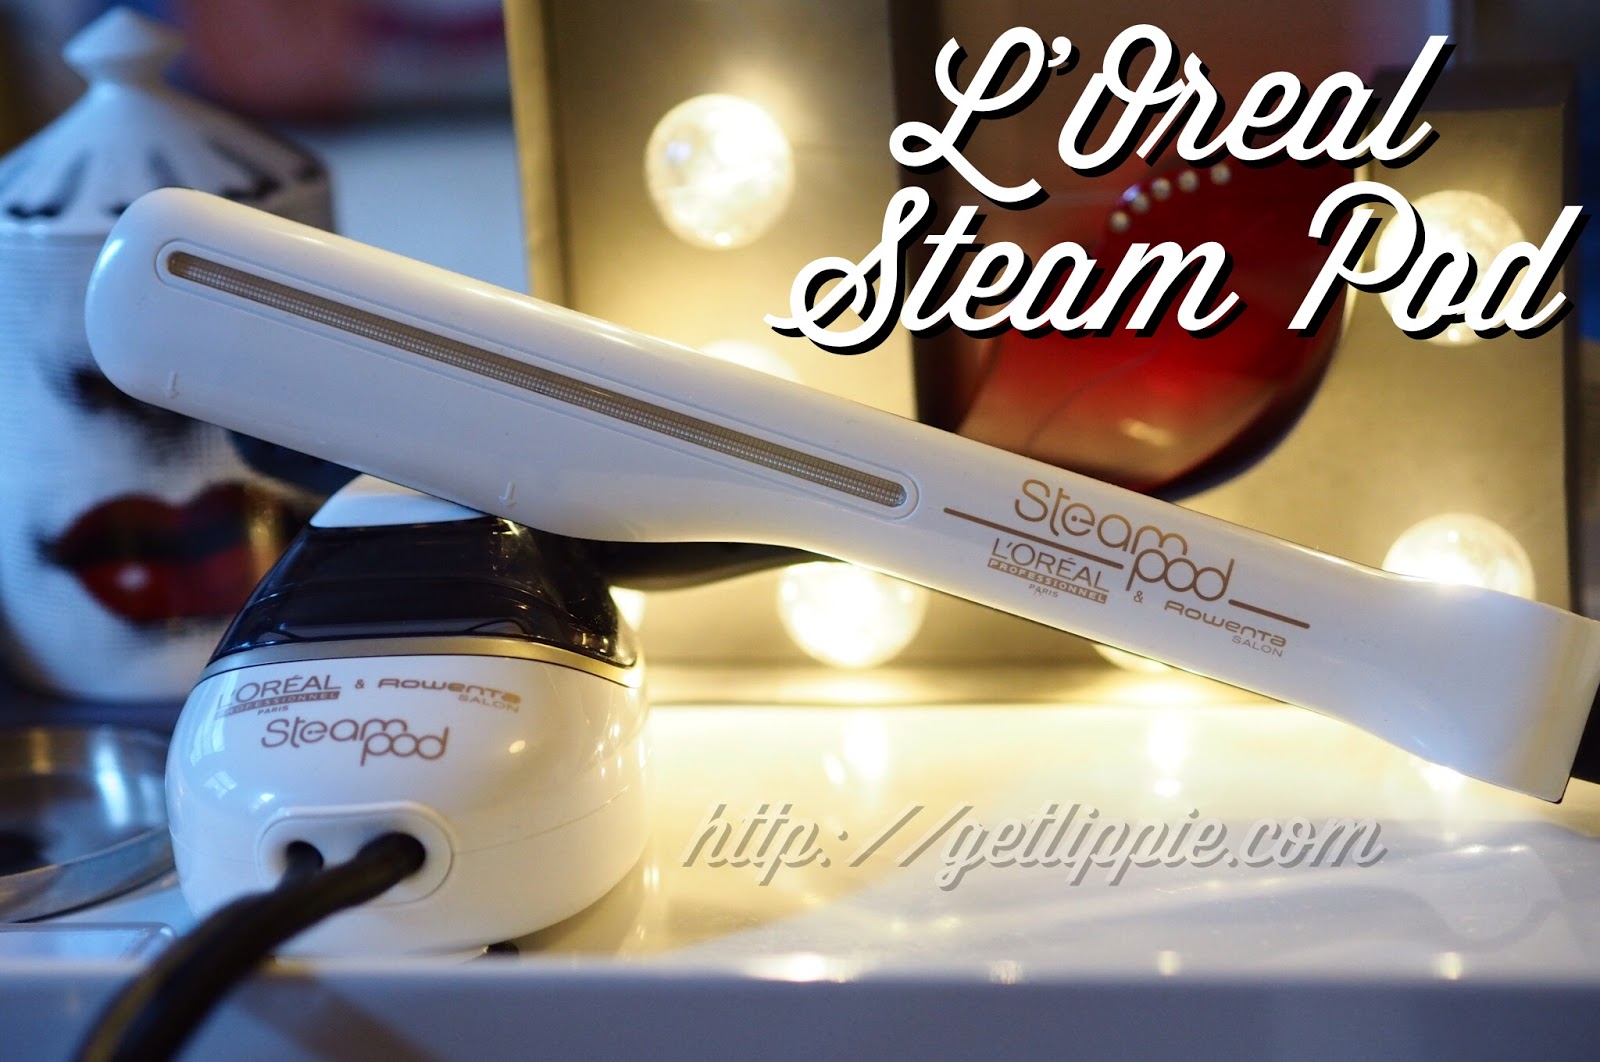 L'Oreal Steampod Review - Get Lippie